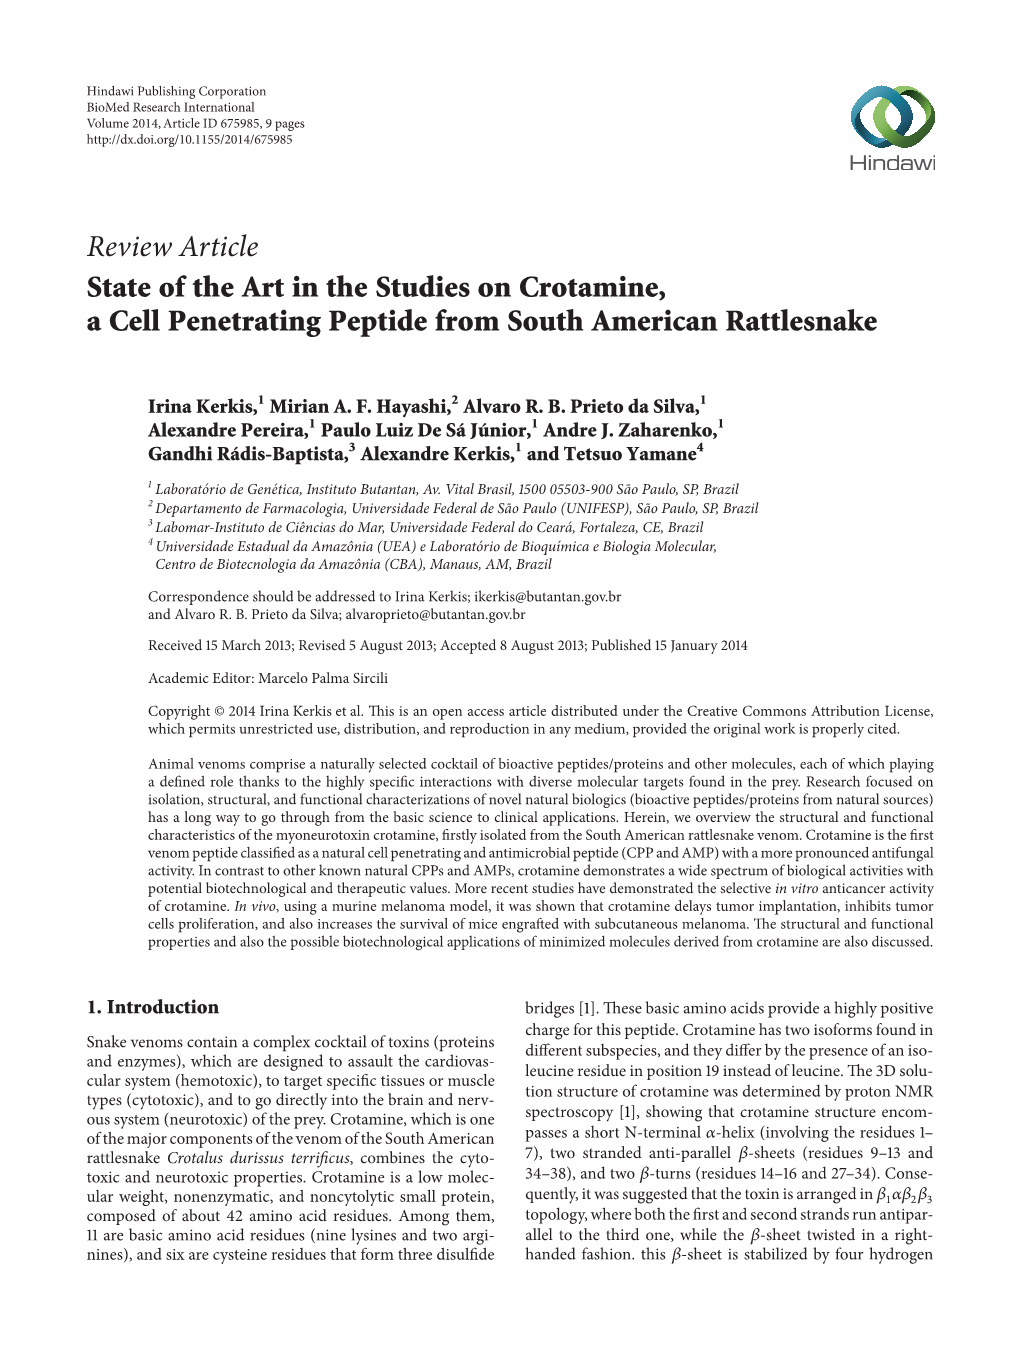 Review Article State of the Art in the Studies on Crotamine, a Cell Penetrating Peptide from South American Rattlesnake